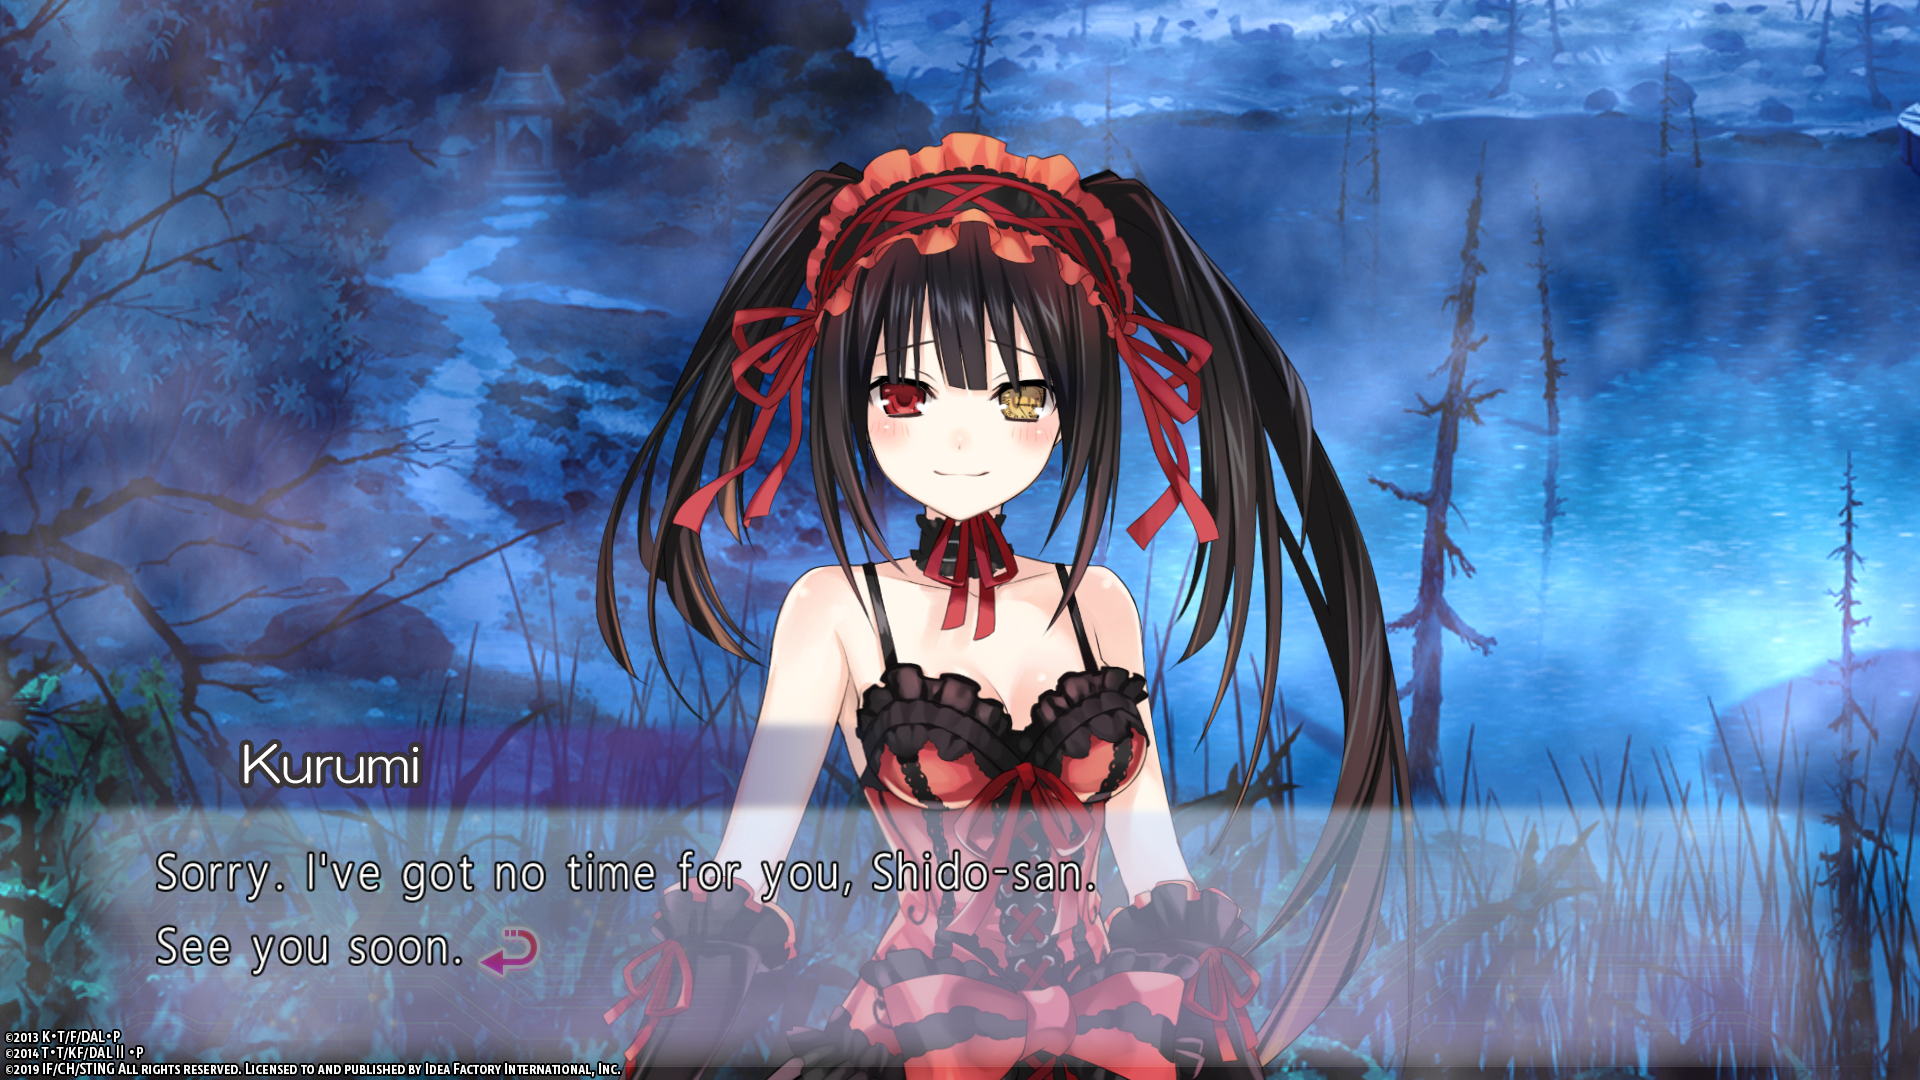 Date A Live: Rio Reincarnation, PlayStation 4, North America, US, West, Idea Factory, pre-order, release date, price, gameplay, features, new screenshots, update, news